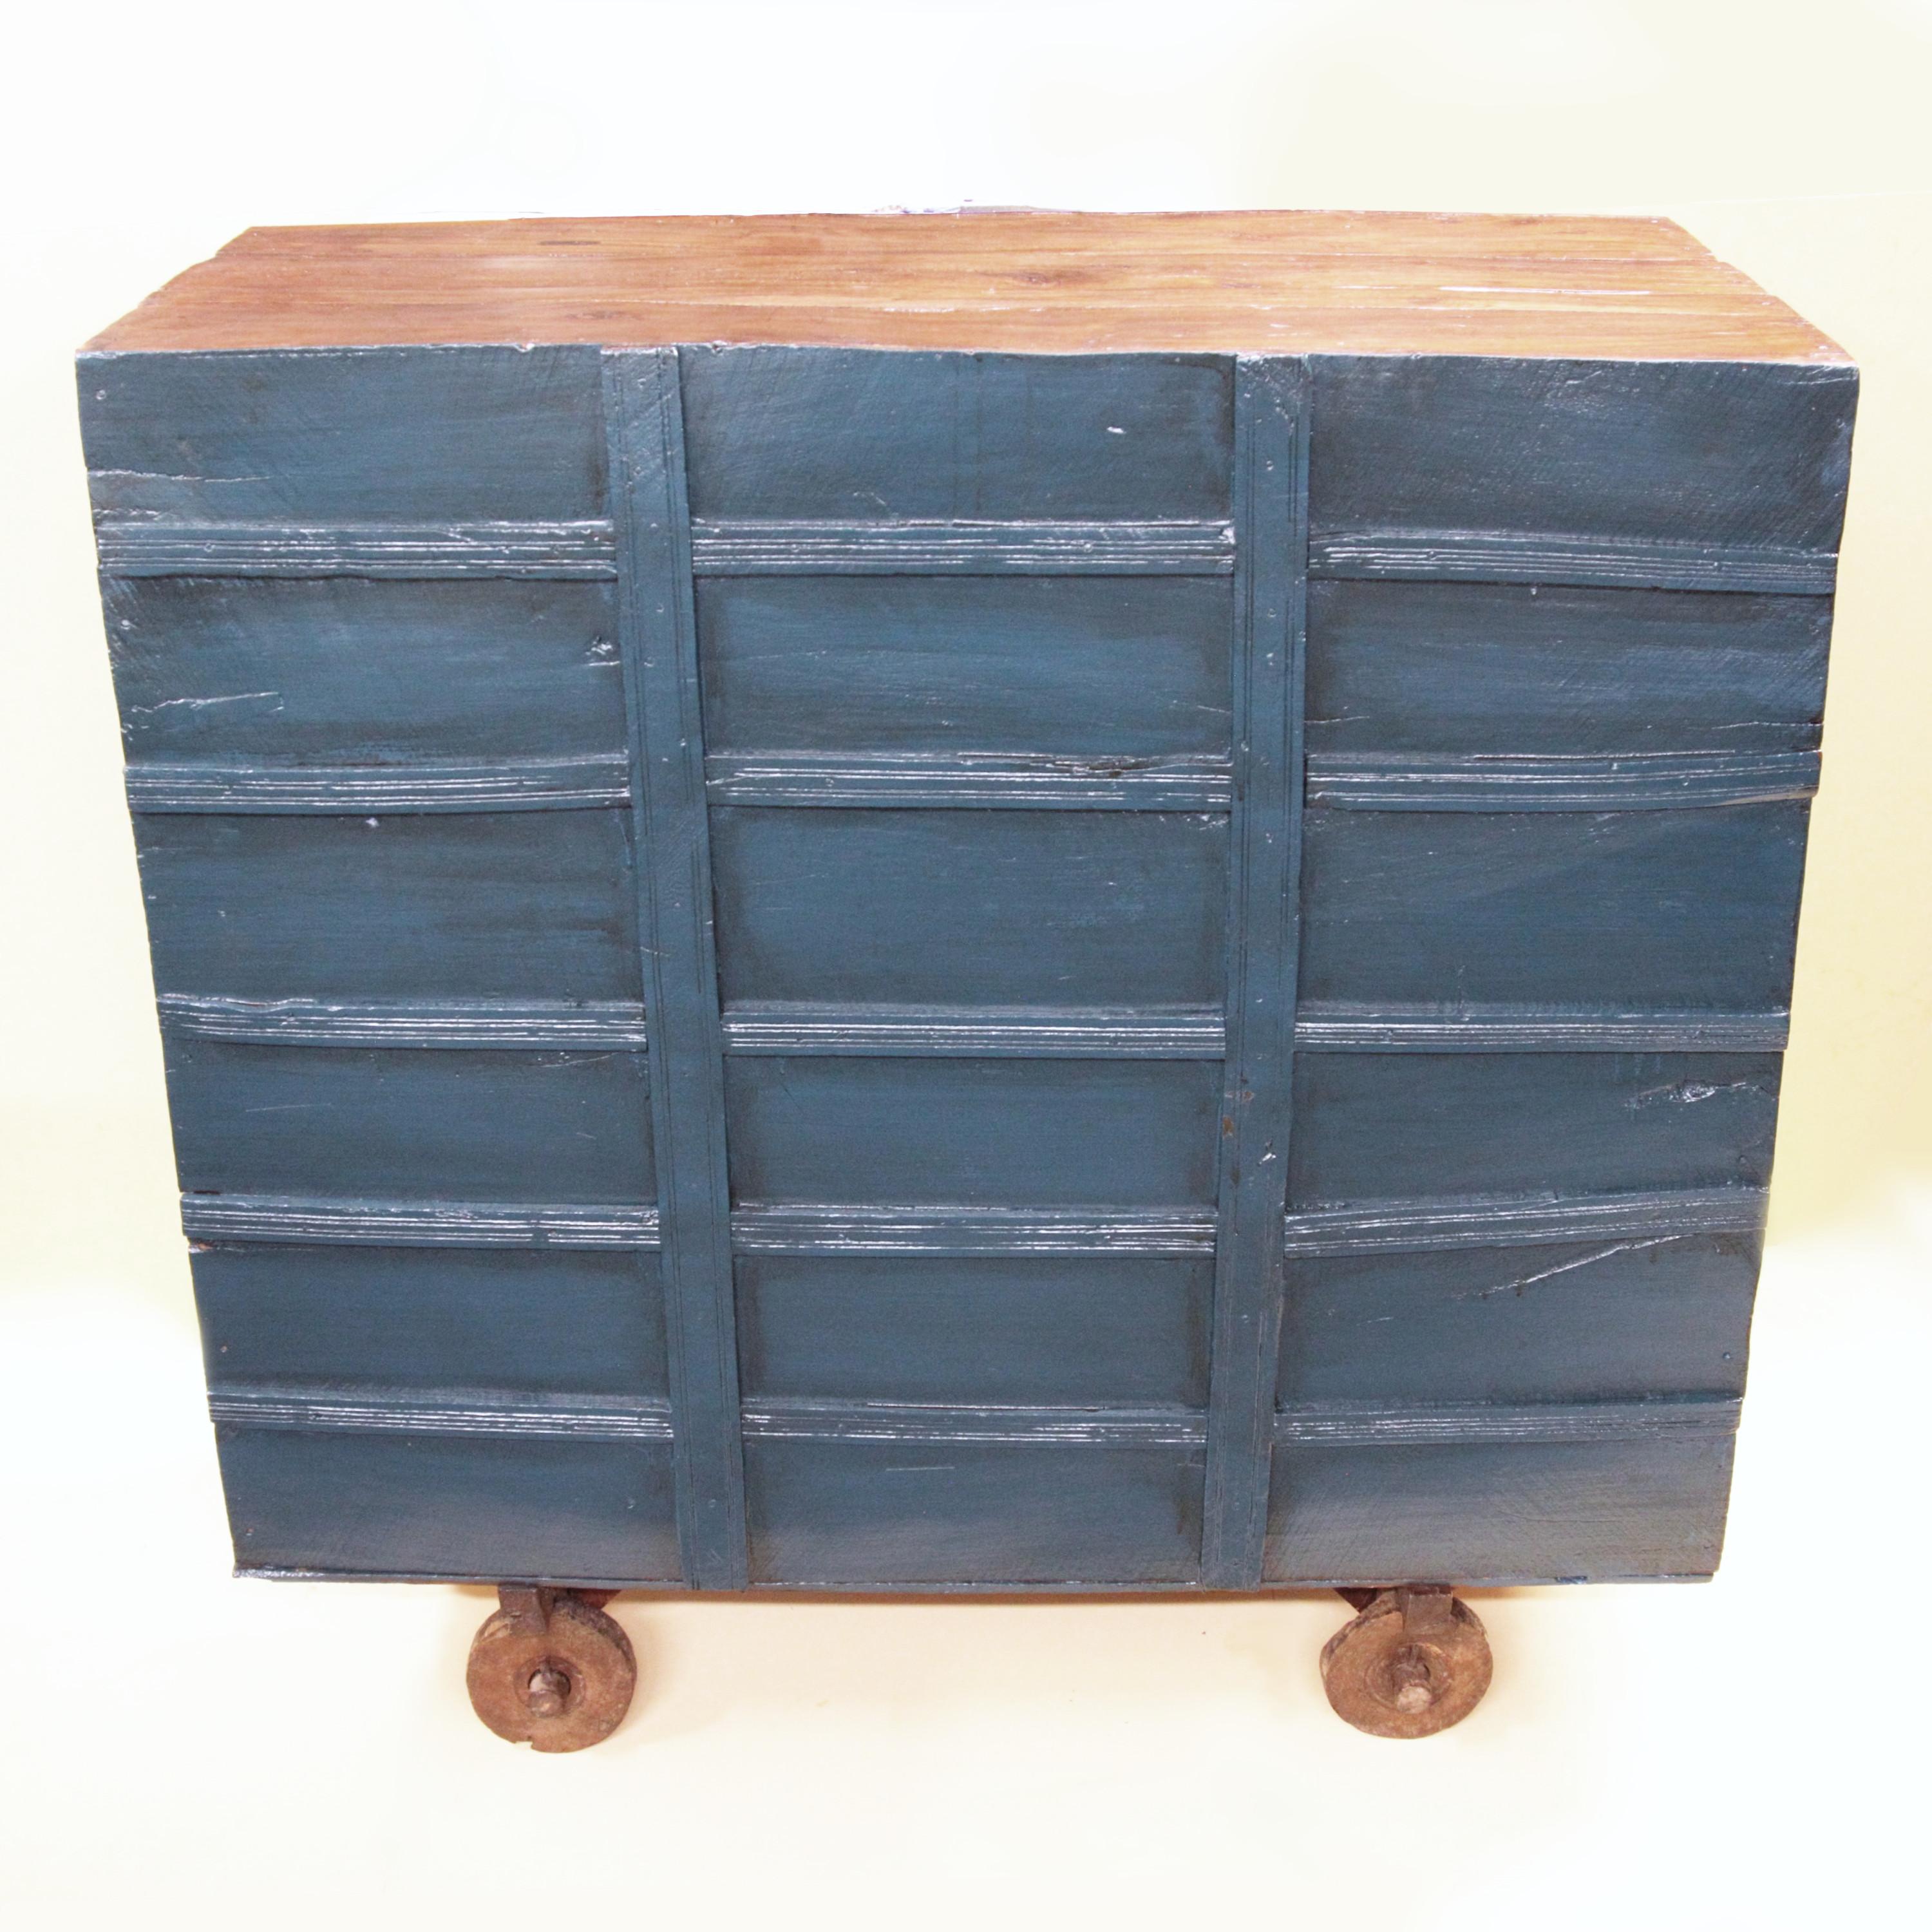 Early 20th Century Antique Painted Indian Rolling Merchant's Chest Trunk For Sale 2